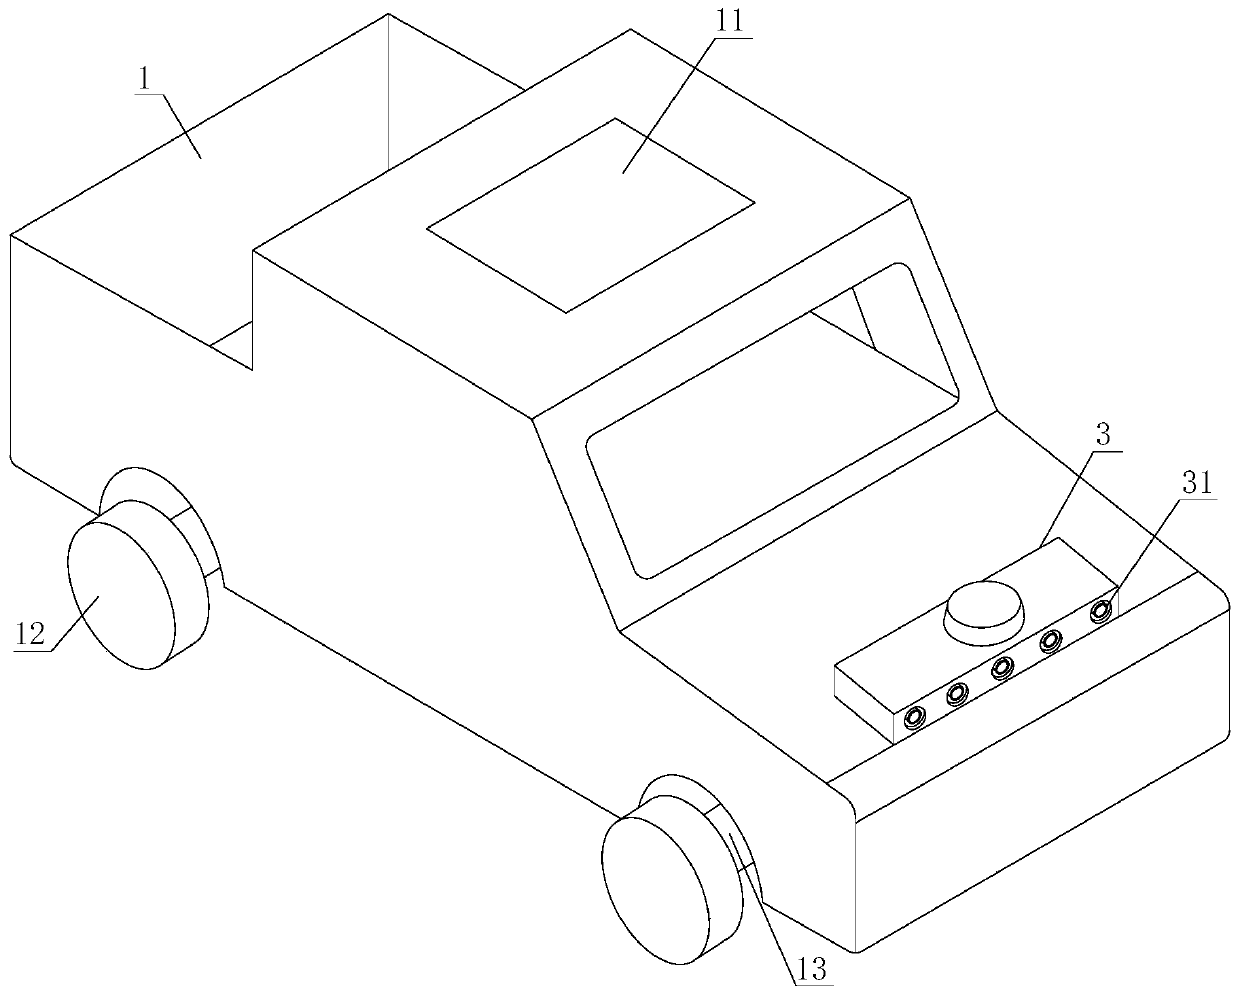 Toy vehicle based on three-dimensional holographic imaging technology